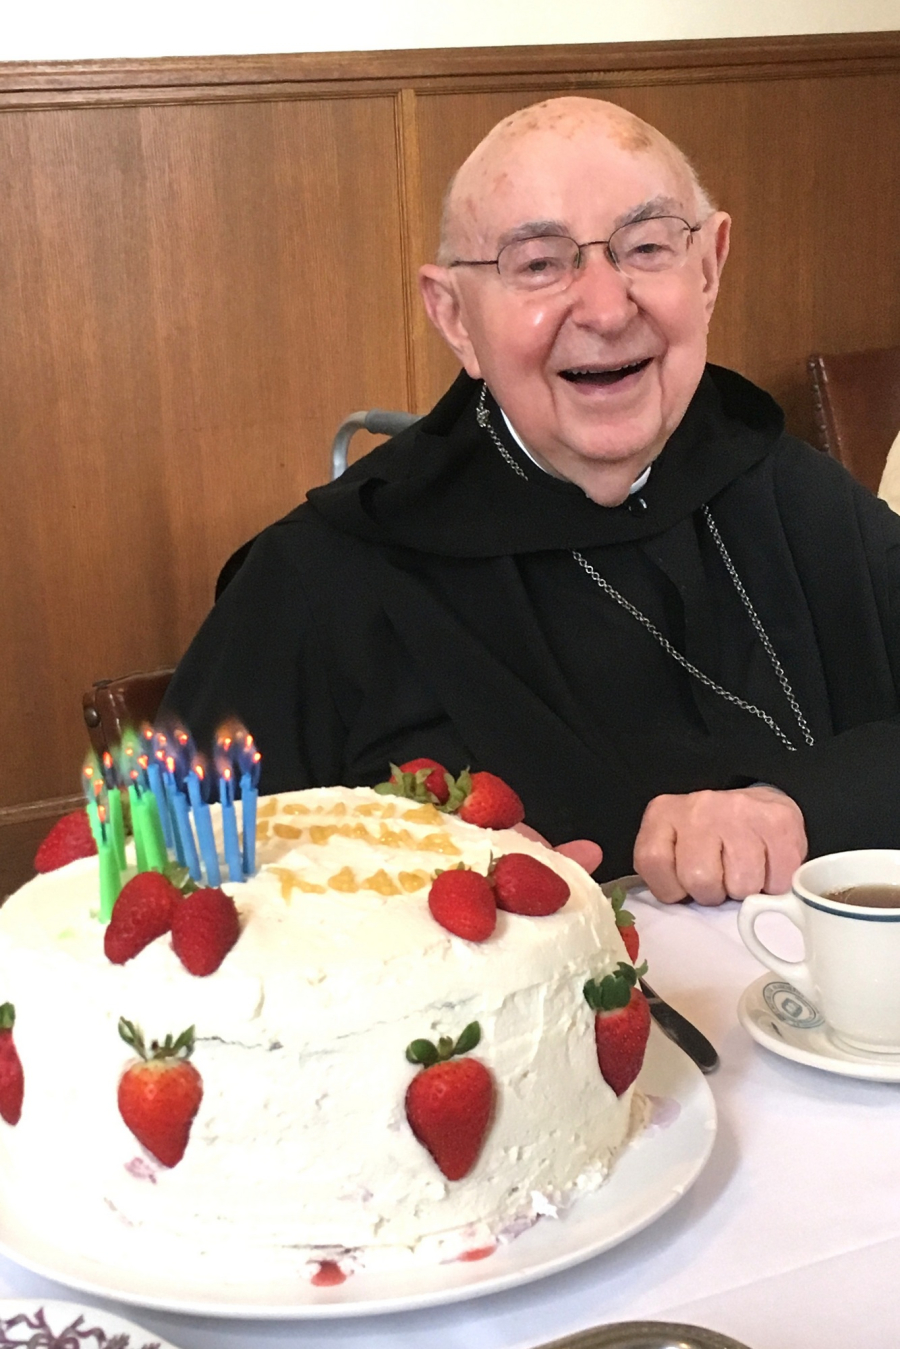 Bishop Joseph Gerry, OSB, on the occasion of his 90th birthday.